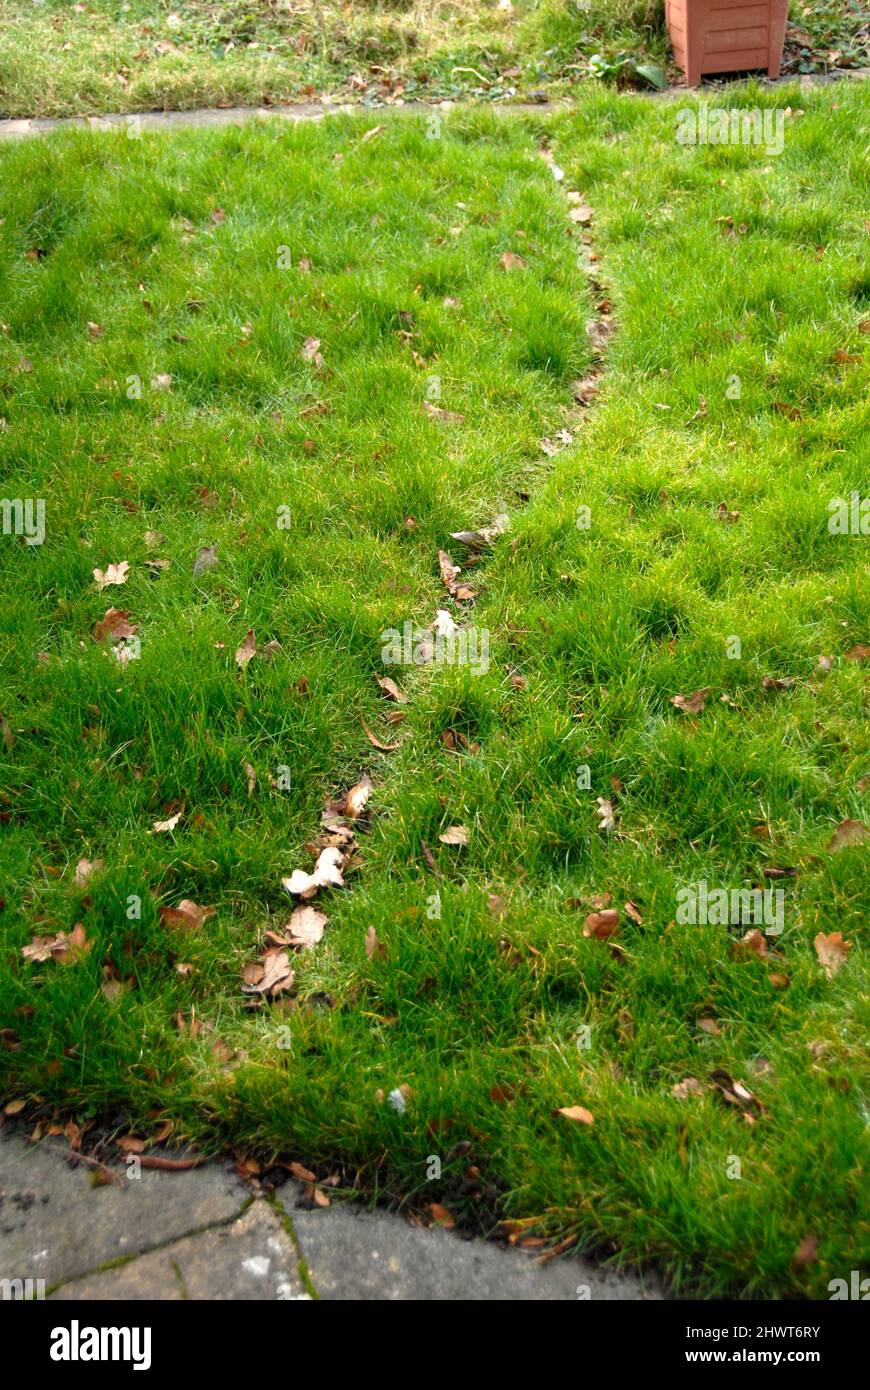 Track left by foxes repeatedly using the same path over long grass in suburban garden, uncut due to inclement weather Stock Photo